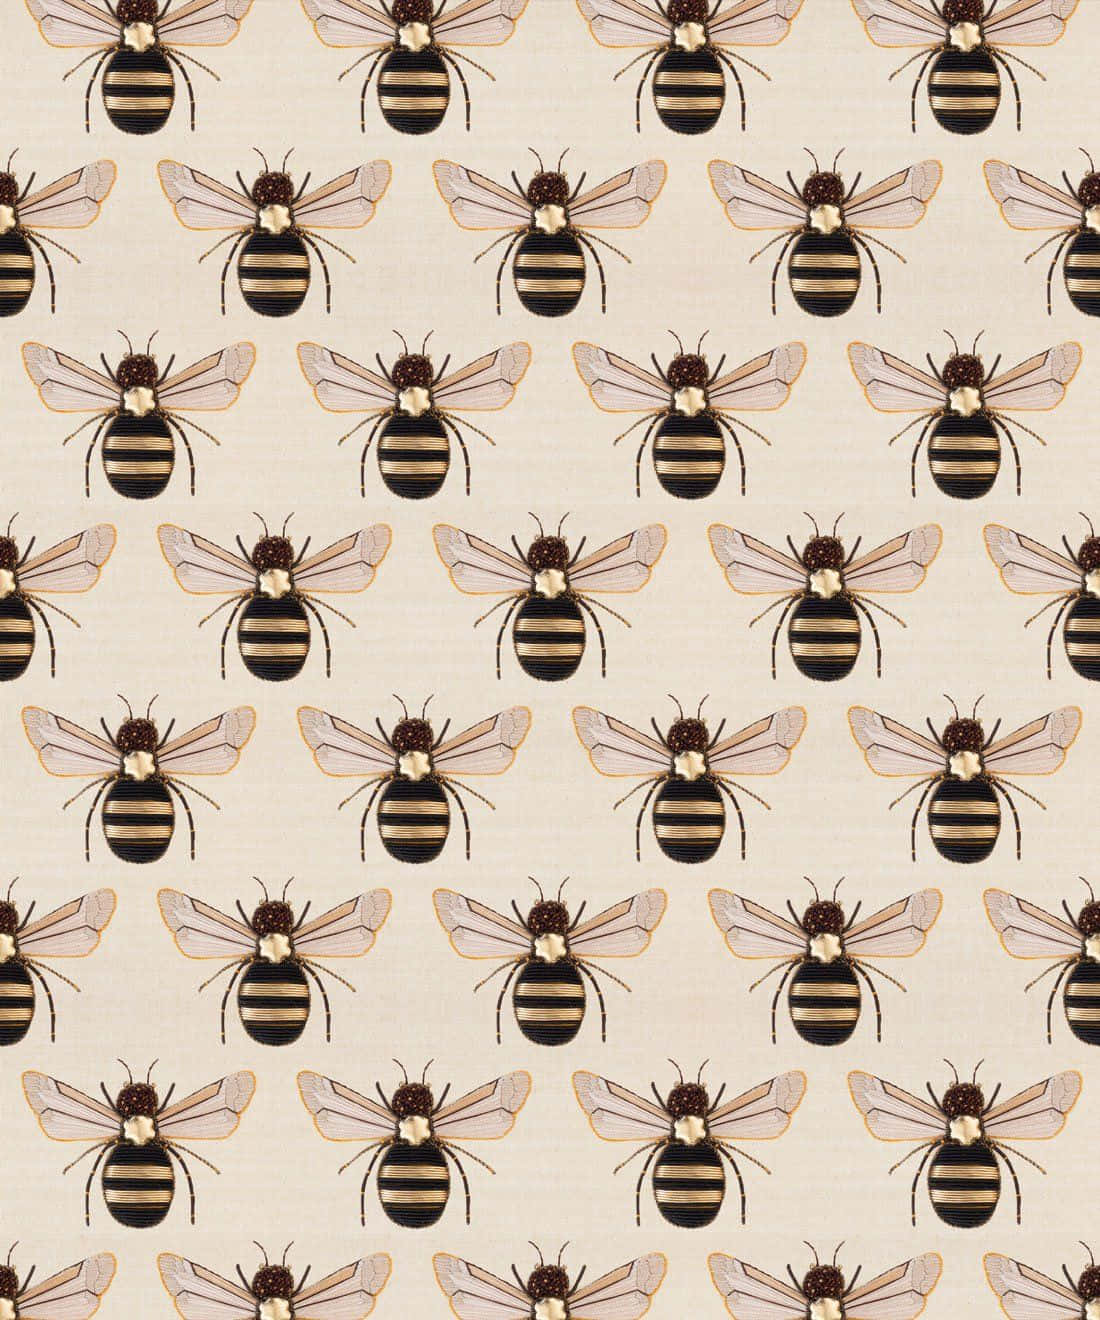 Get Inspired with a Vintage Bee Wallpaper